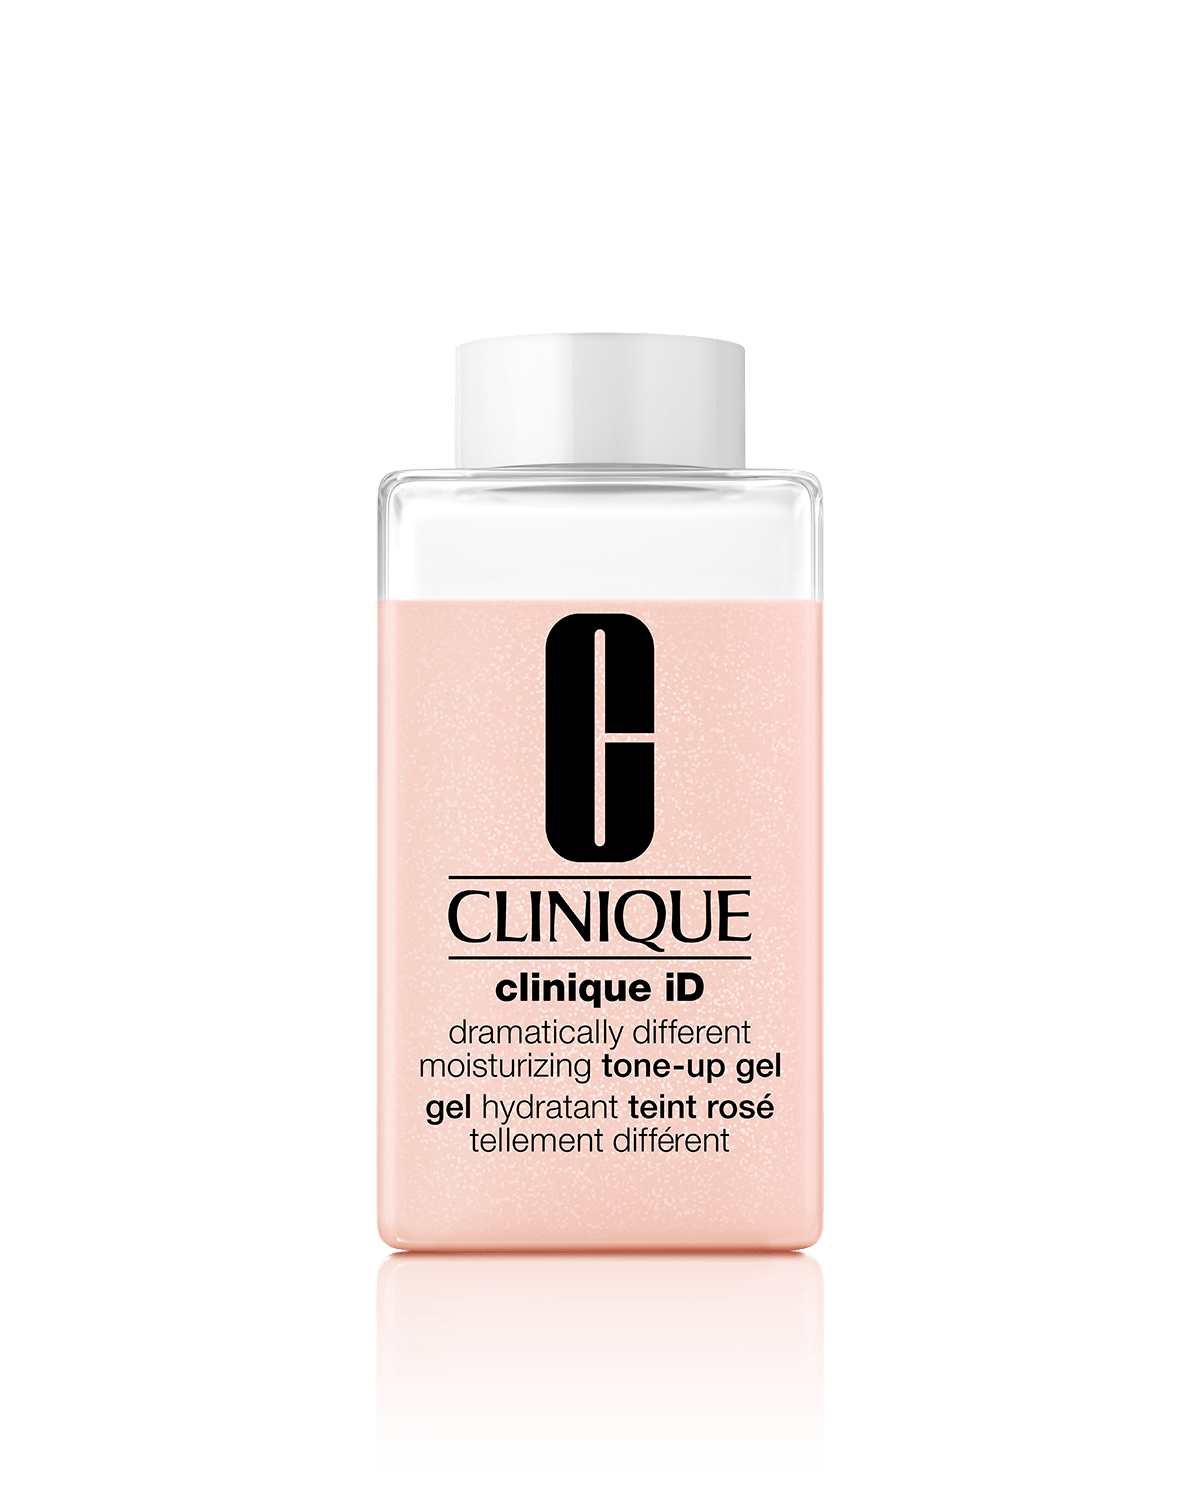 Clinique iD™: Dramatically Different™ Moisturizing Tone-up Gel